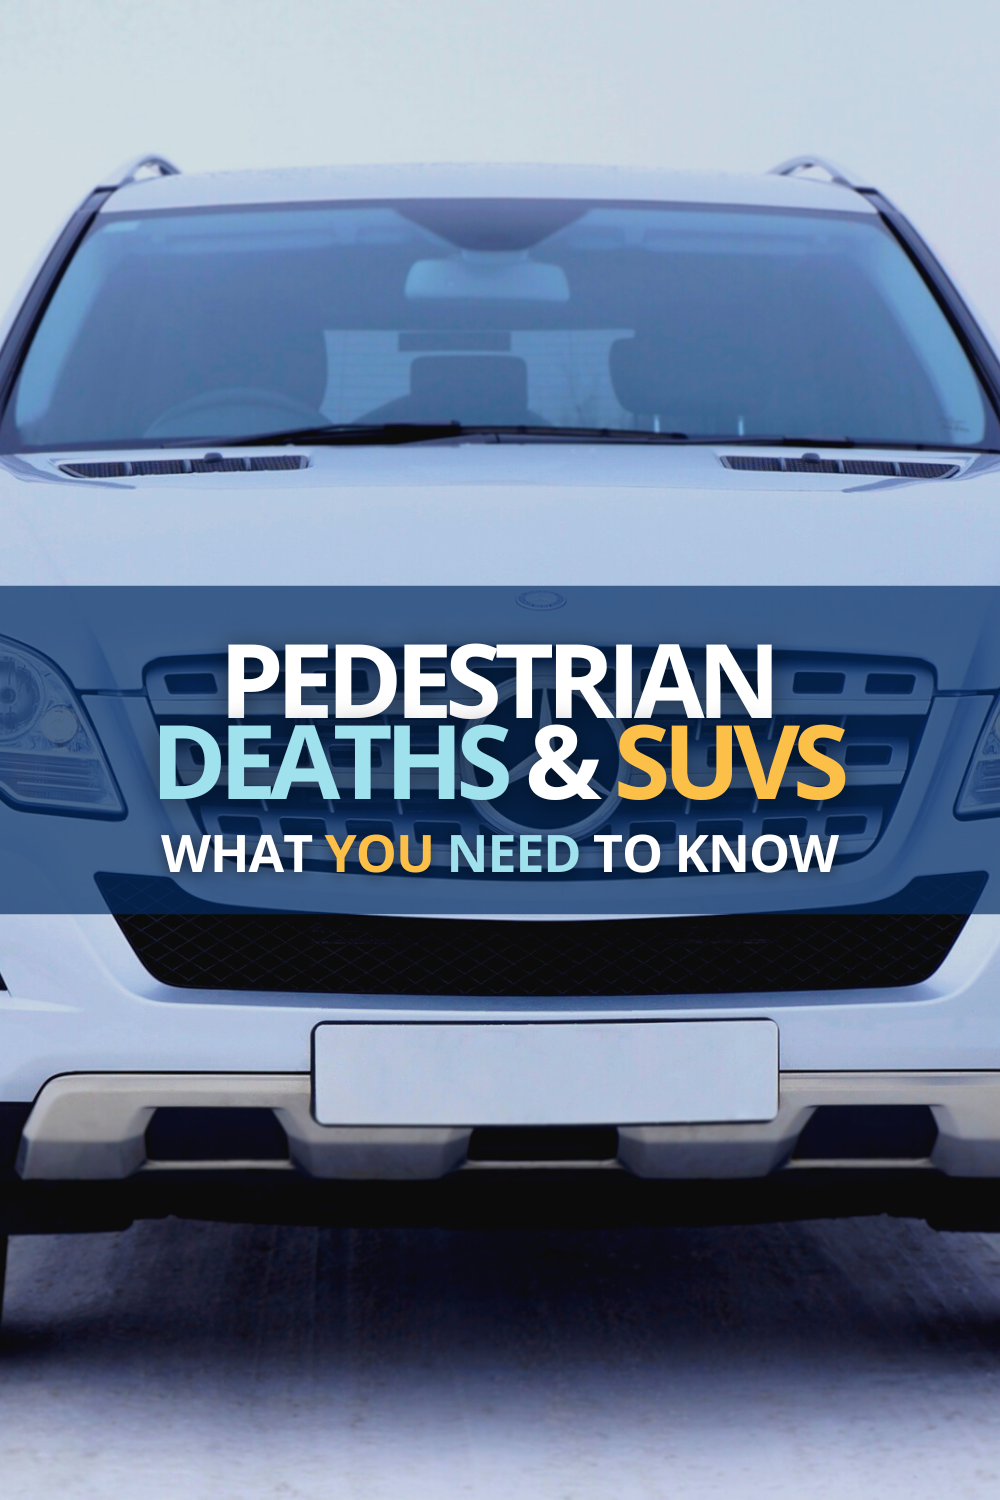 Pedestrian deaths and SUVs: What You Need To Know